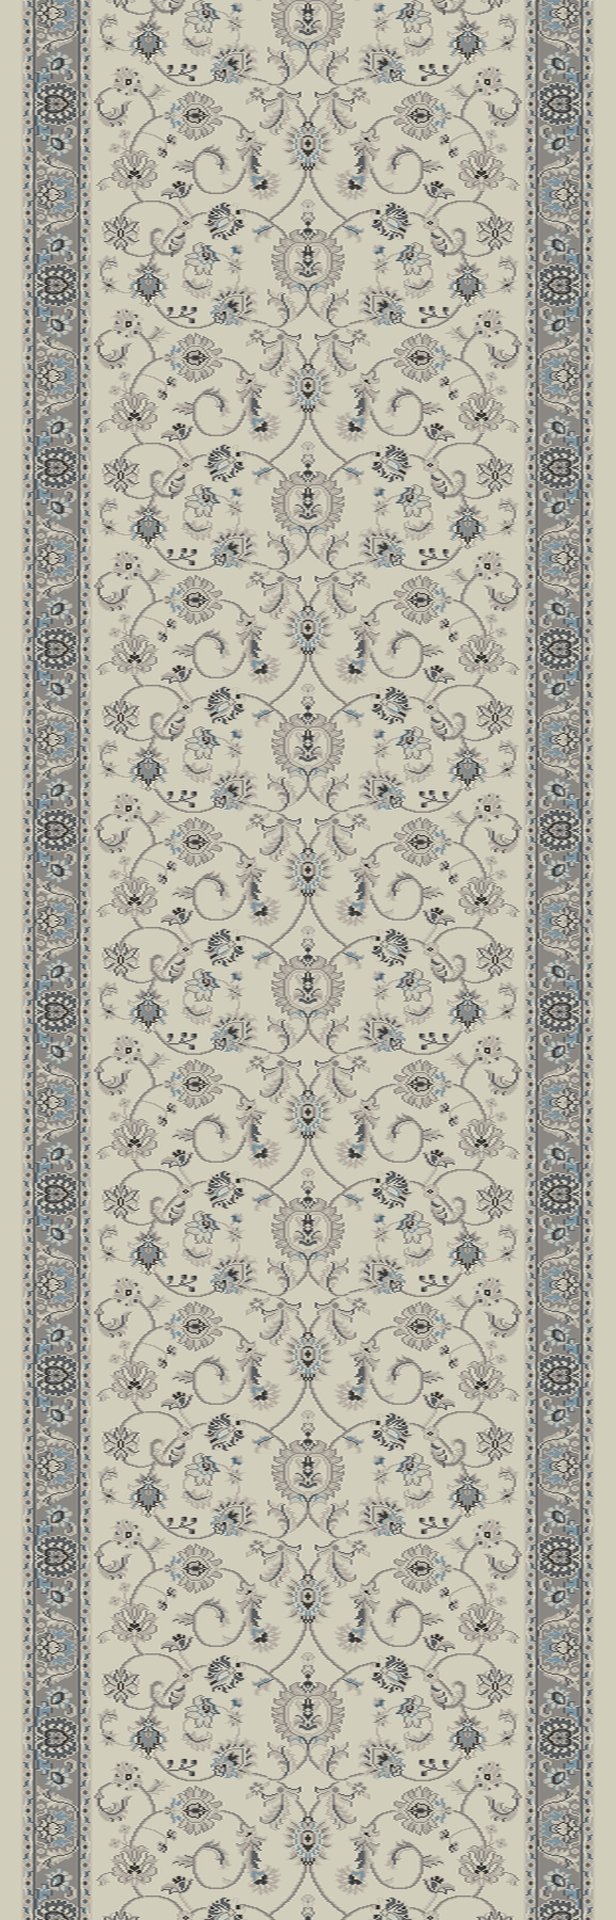 Provincia Ivory-Grey Stair Runners 2812 By Rug Depot 8 Sizes Nashua